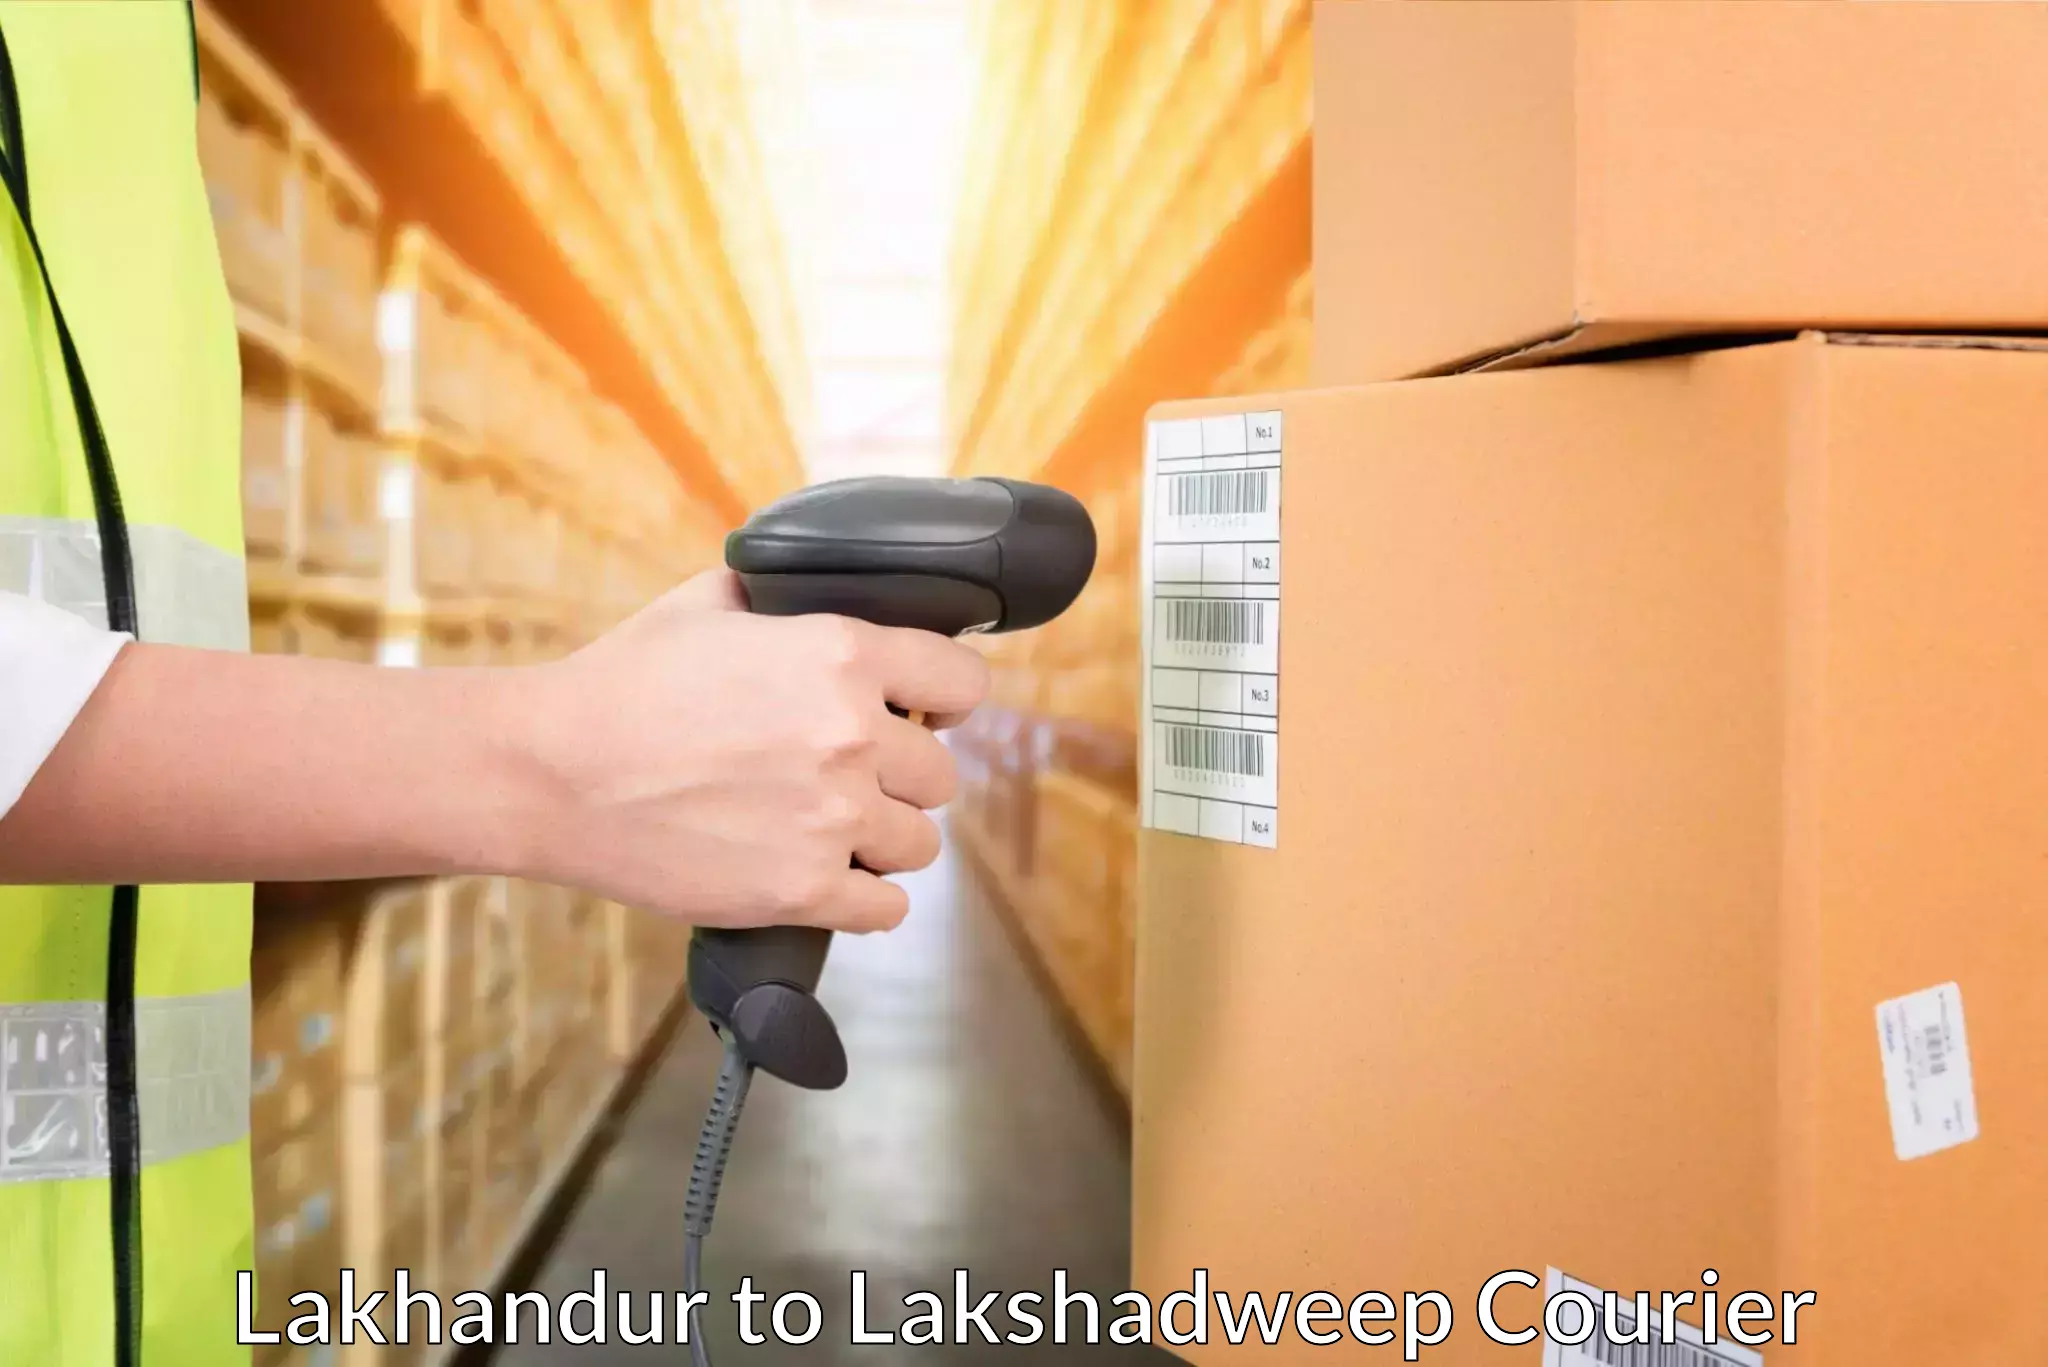 Fastest parcel delivery Lakhandur to Lakshadweep